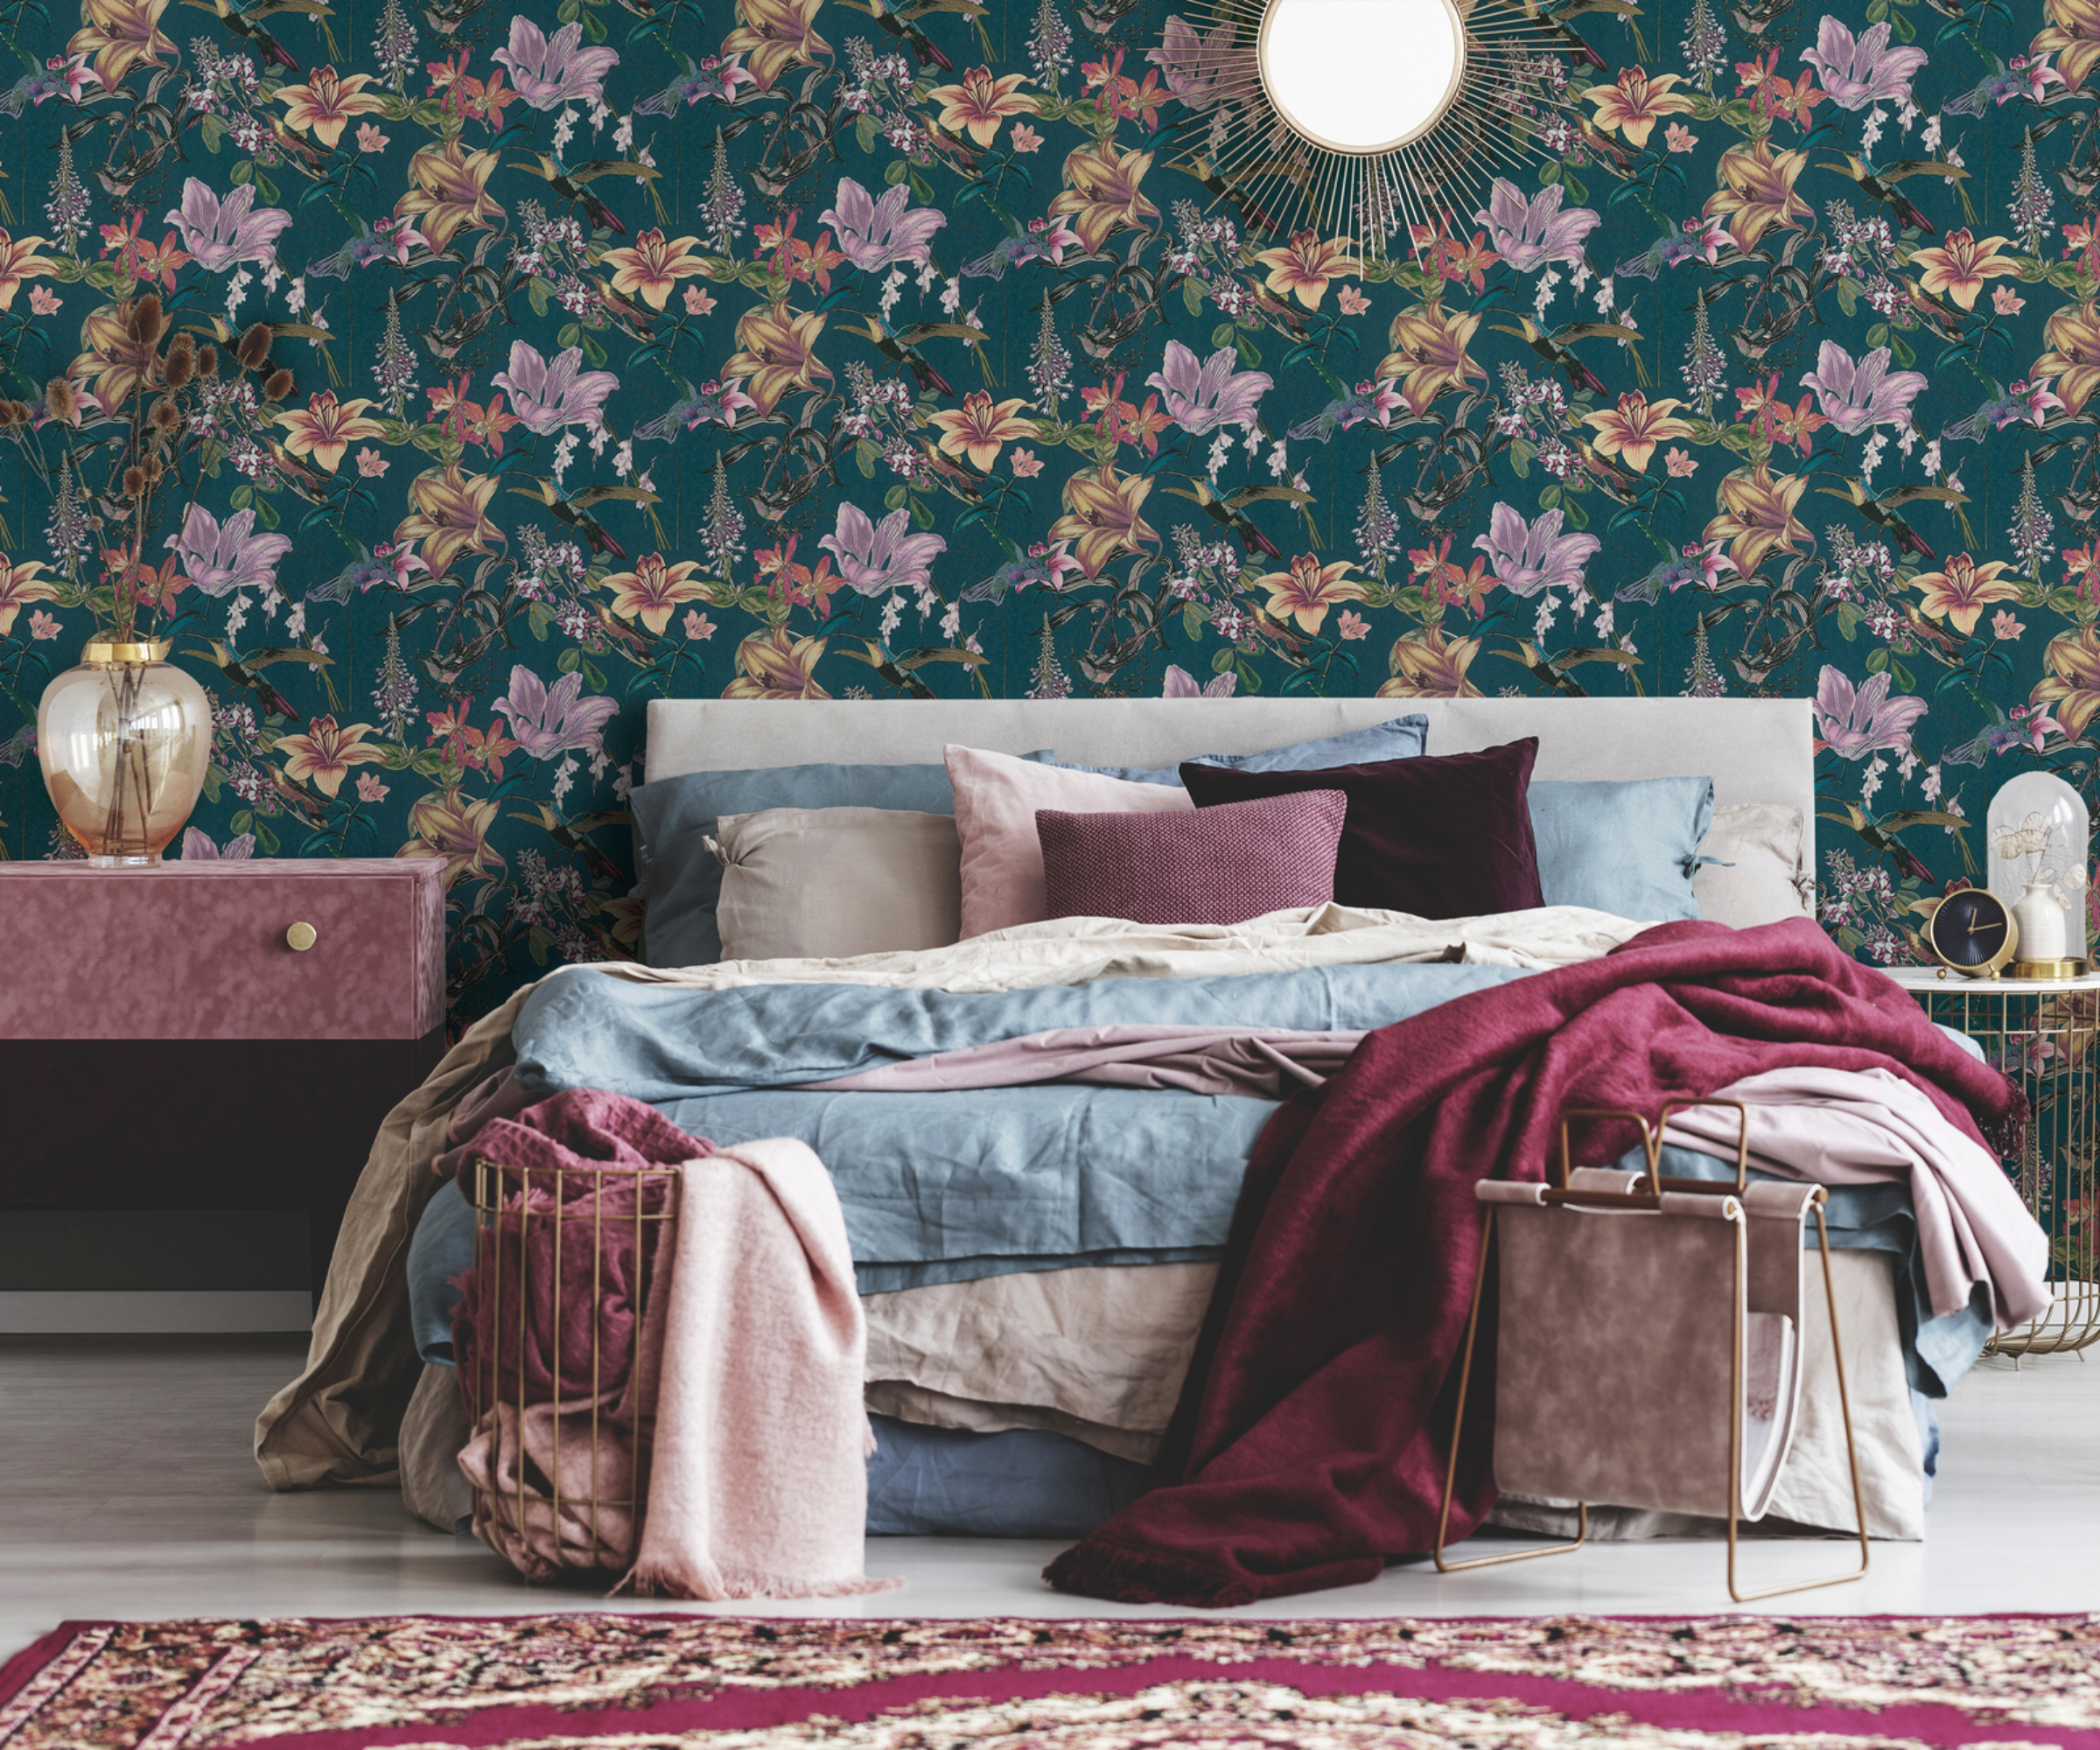 pink and blue botanical wallpaper behind bed with blue and pink bed linen and throws